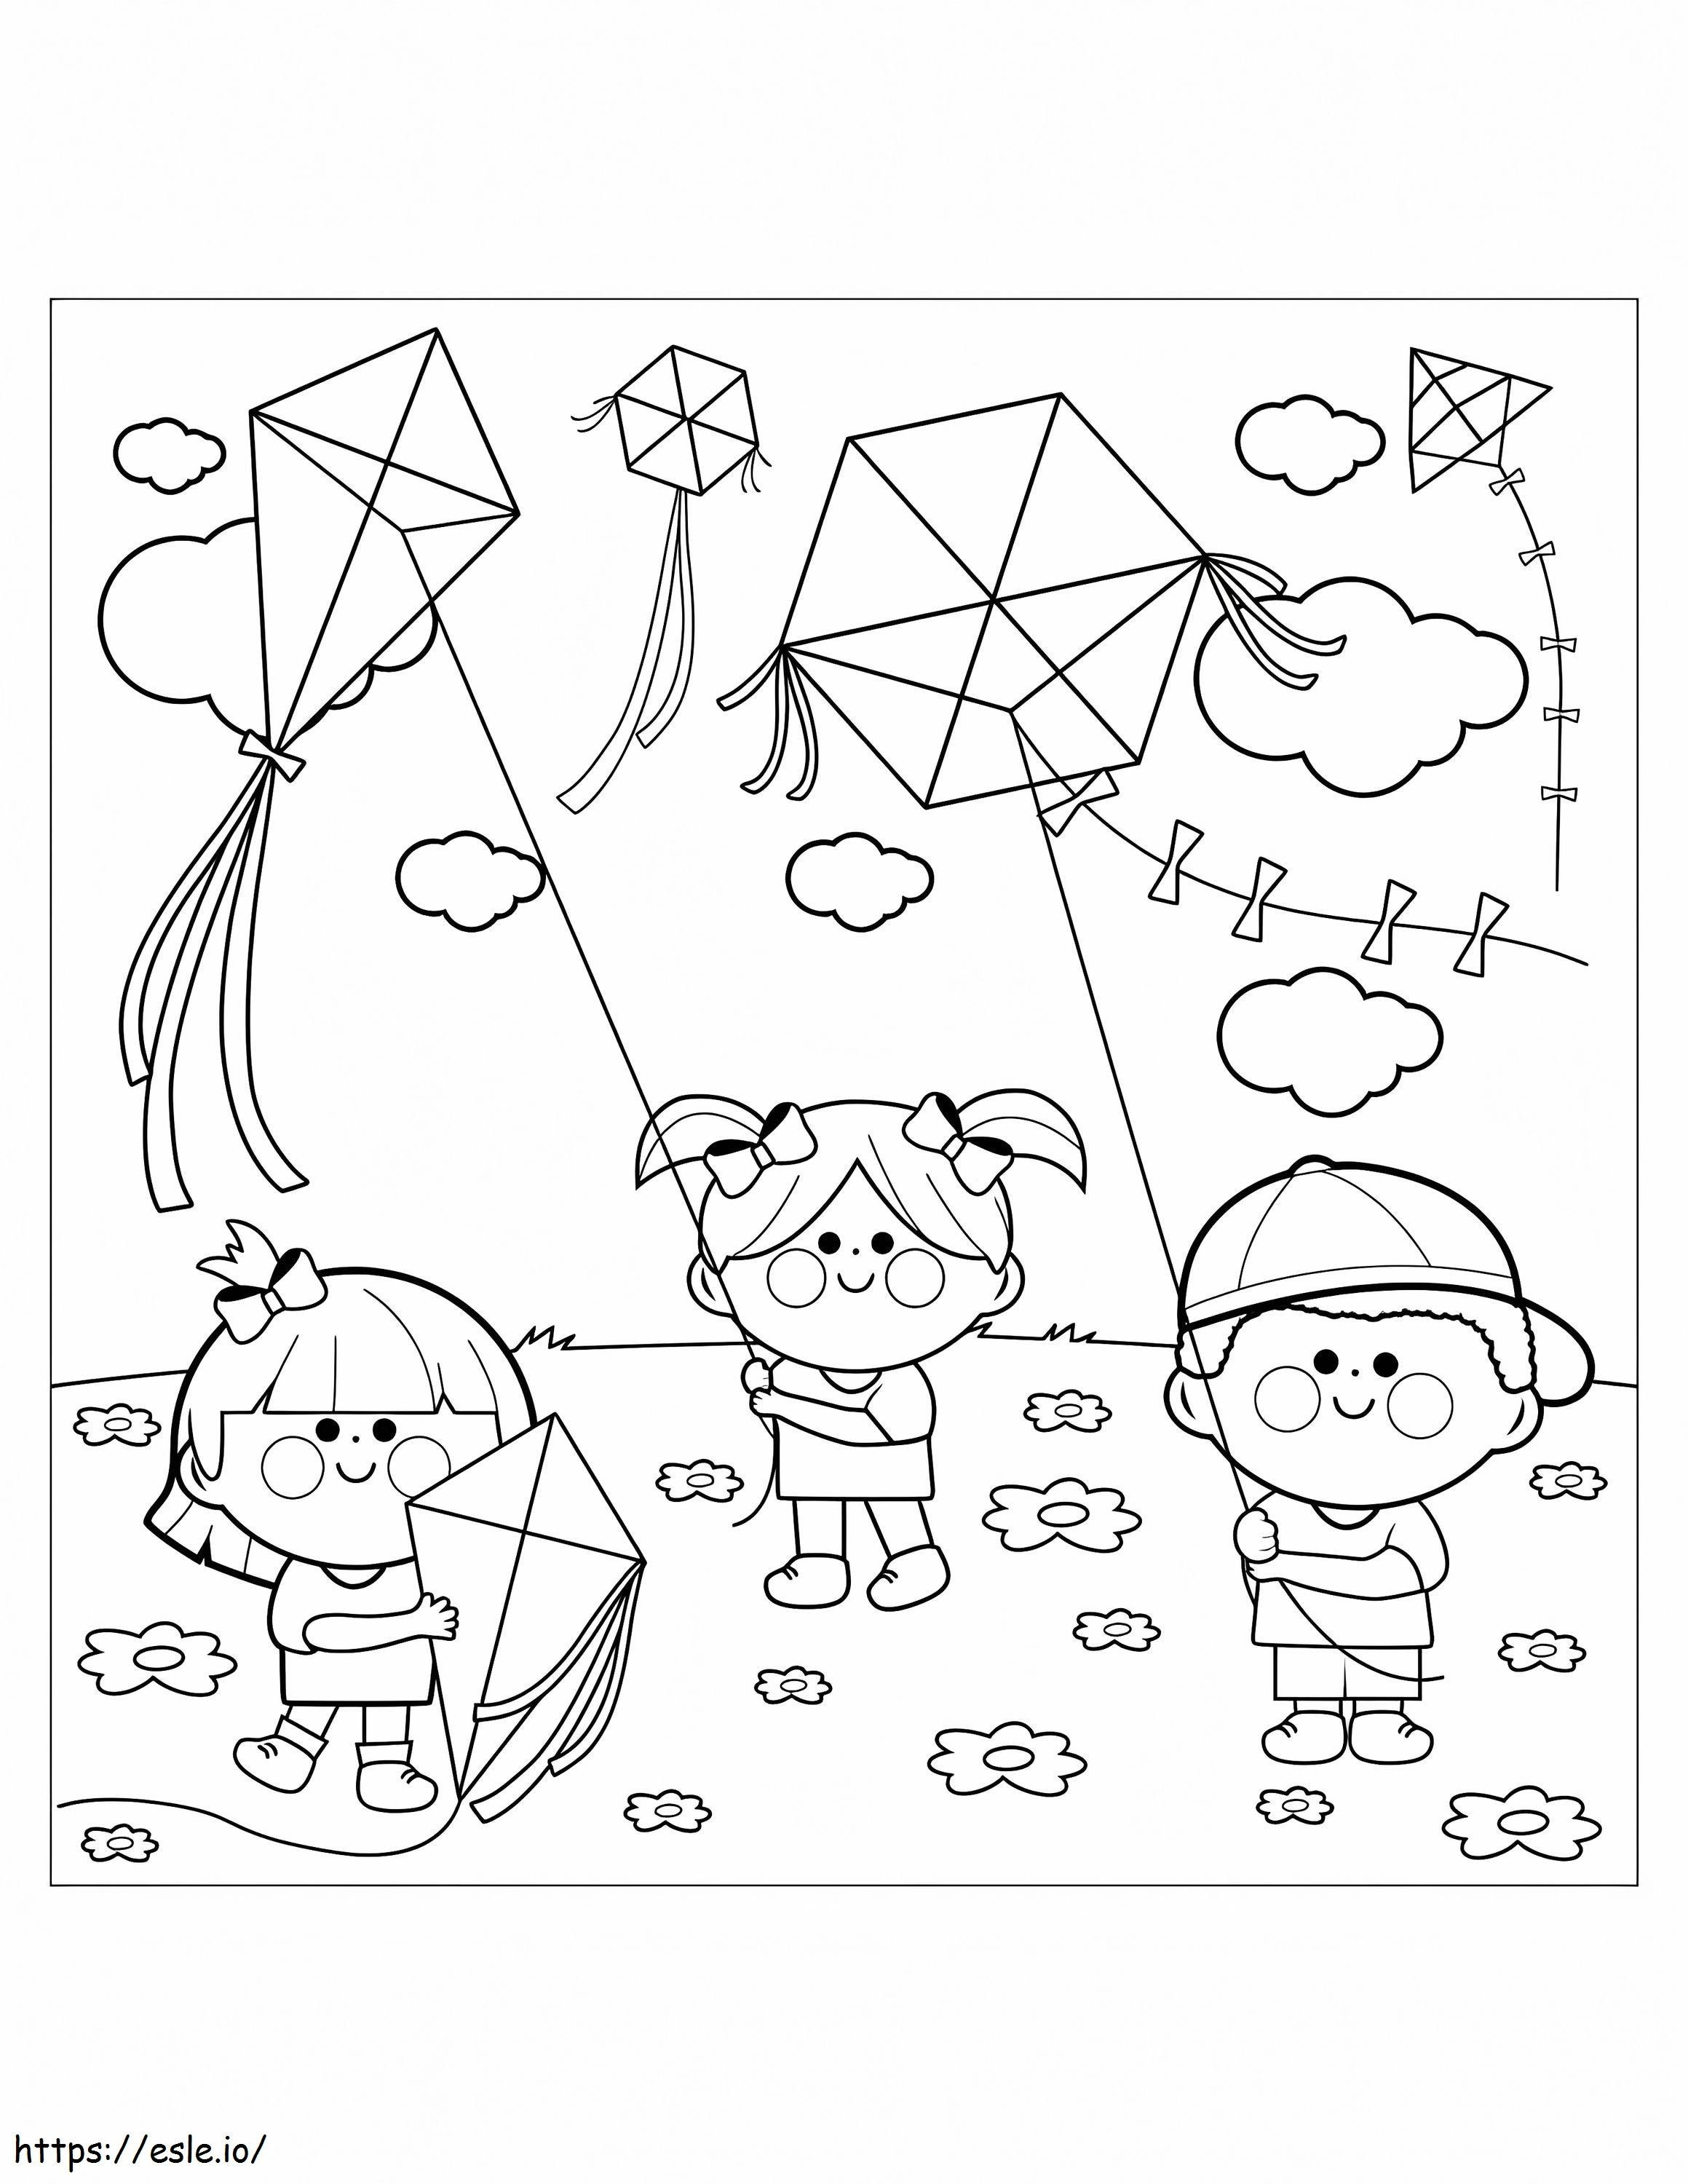 Children Flying Kites coloring page